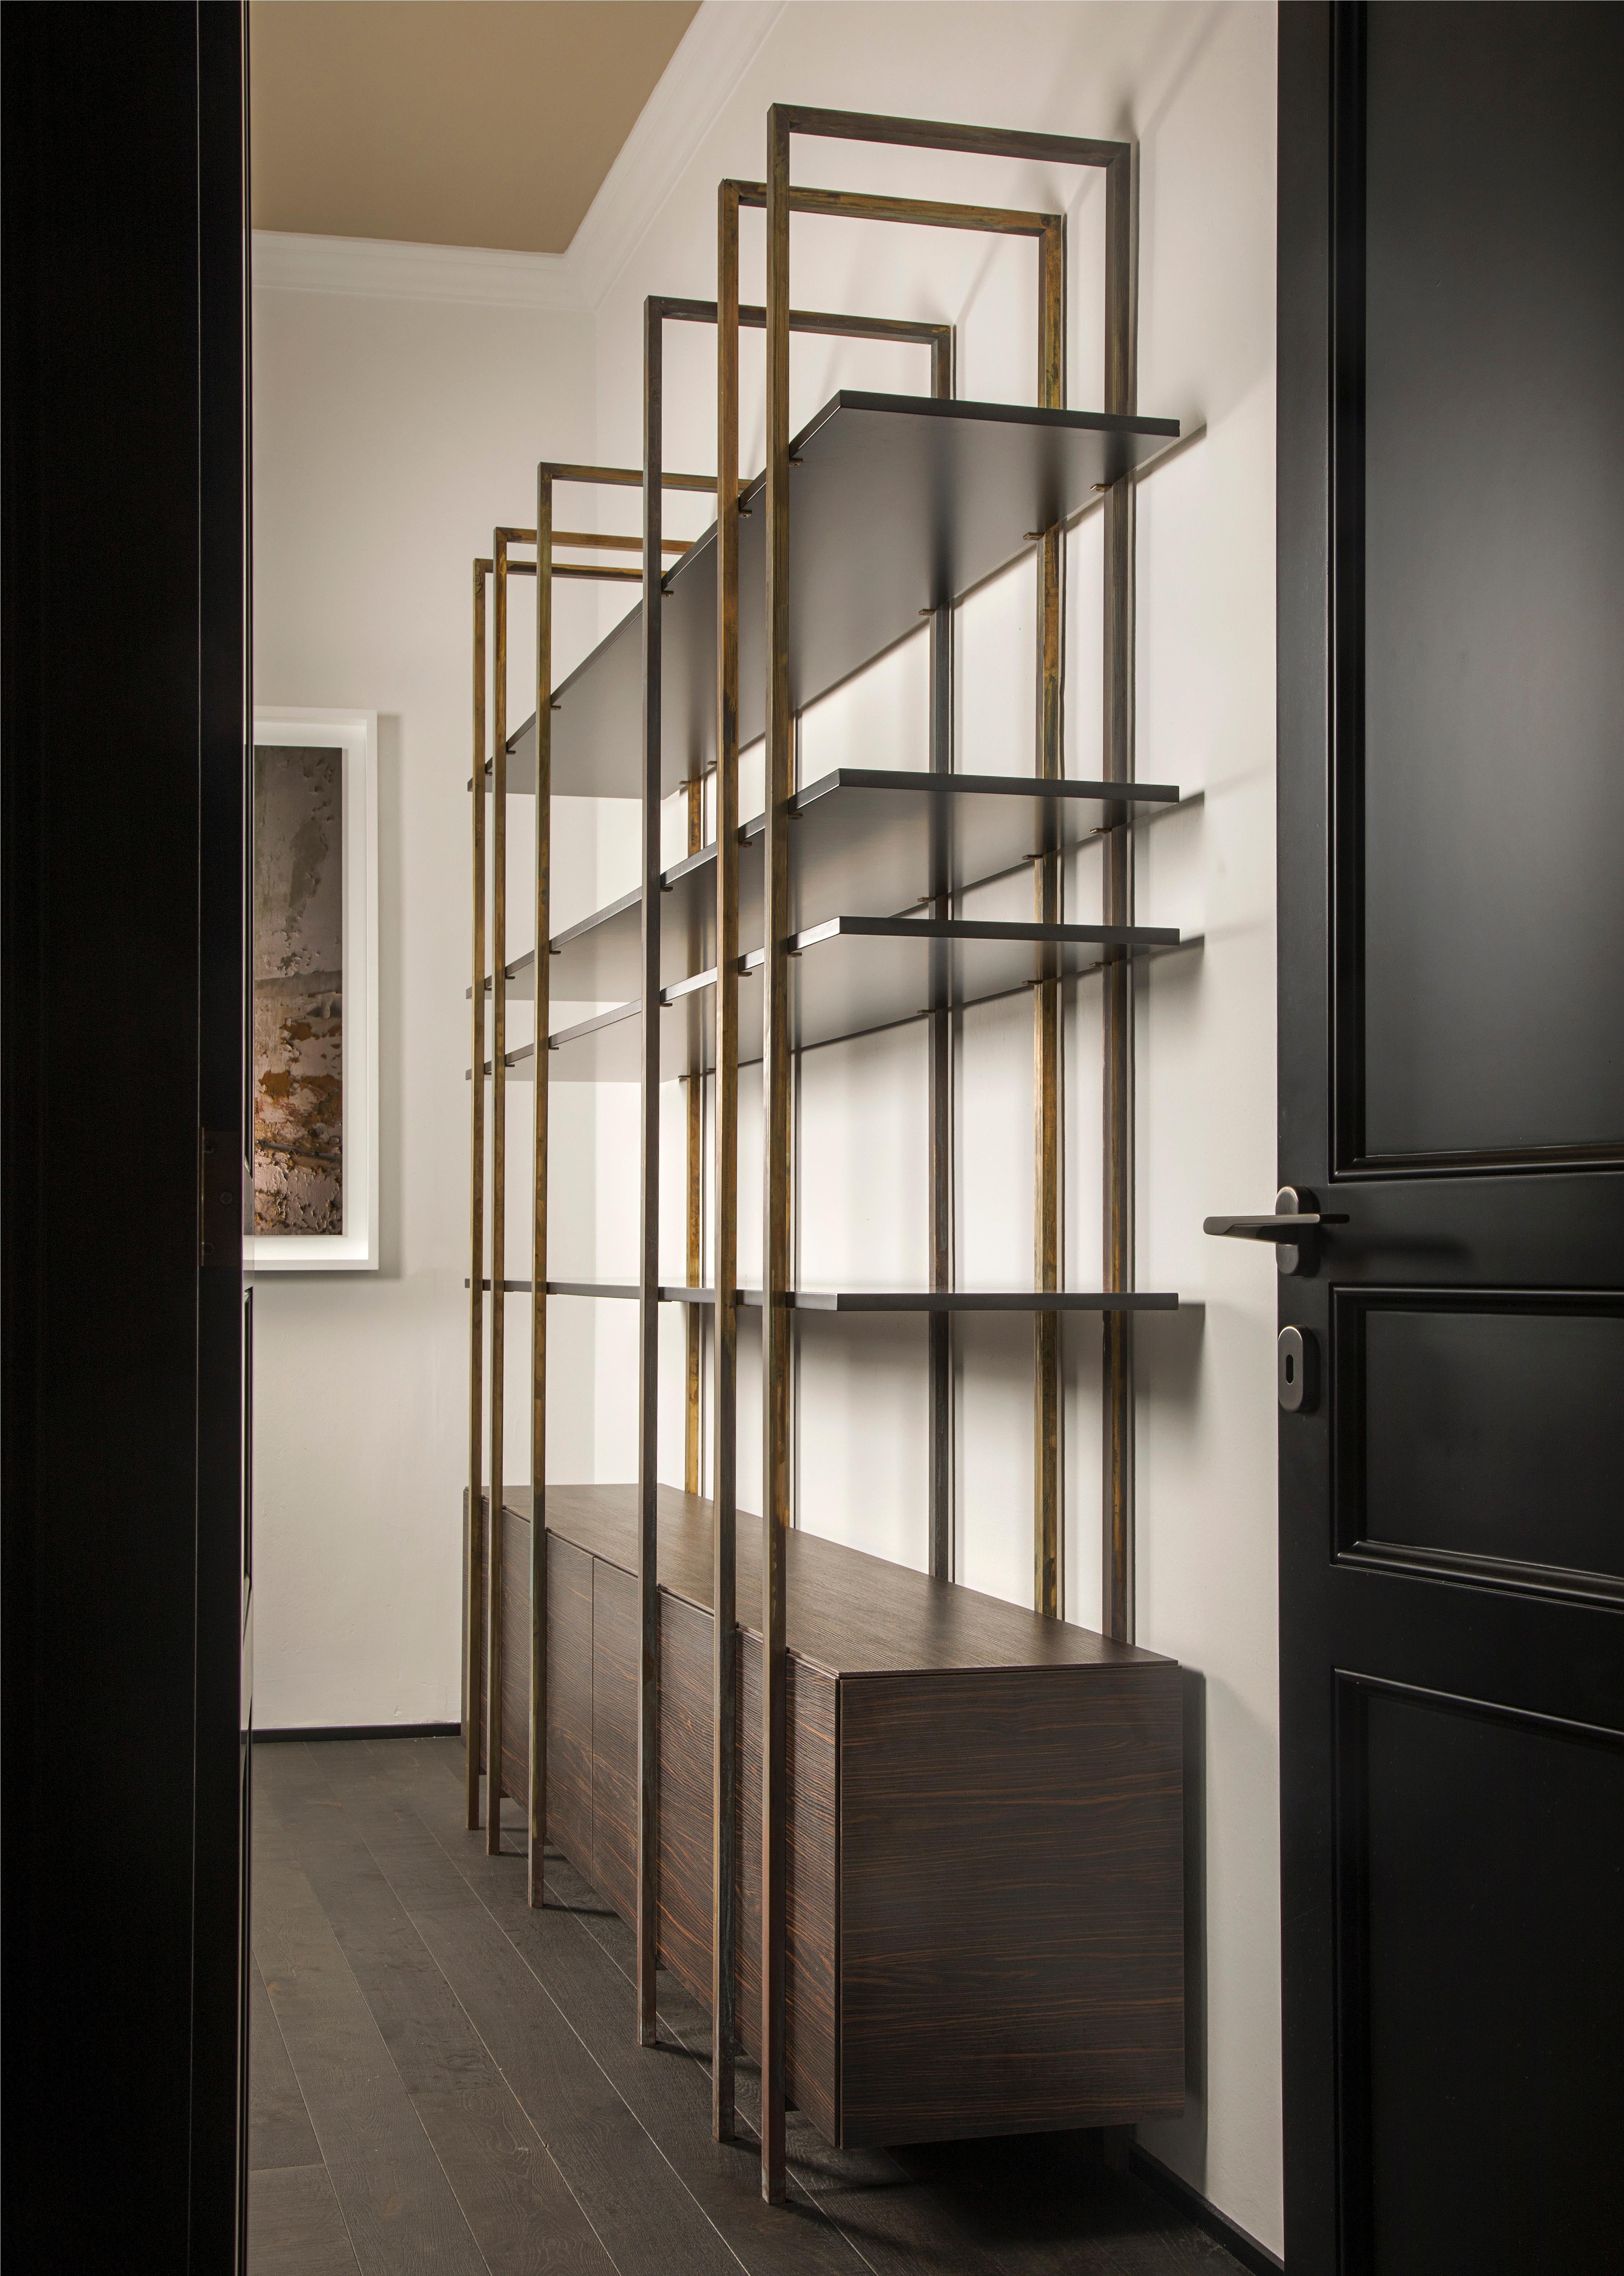 Much more than just an expositor, the bookcase, called Reflection, get nearer to the new daily habits. With researched functionality they provide continuity with the contemporary lifestyles. A bookcase punctuated by horizontal planes and metallic